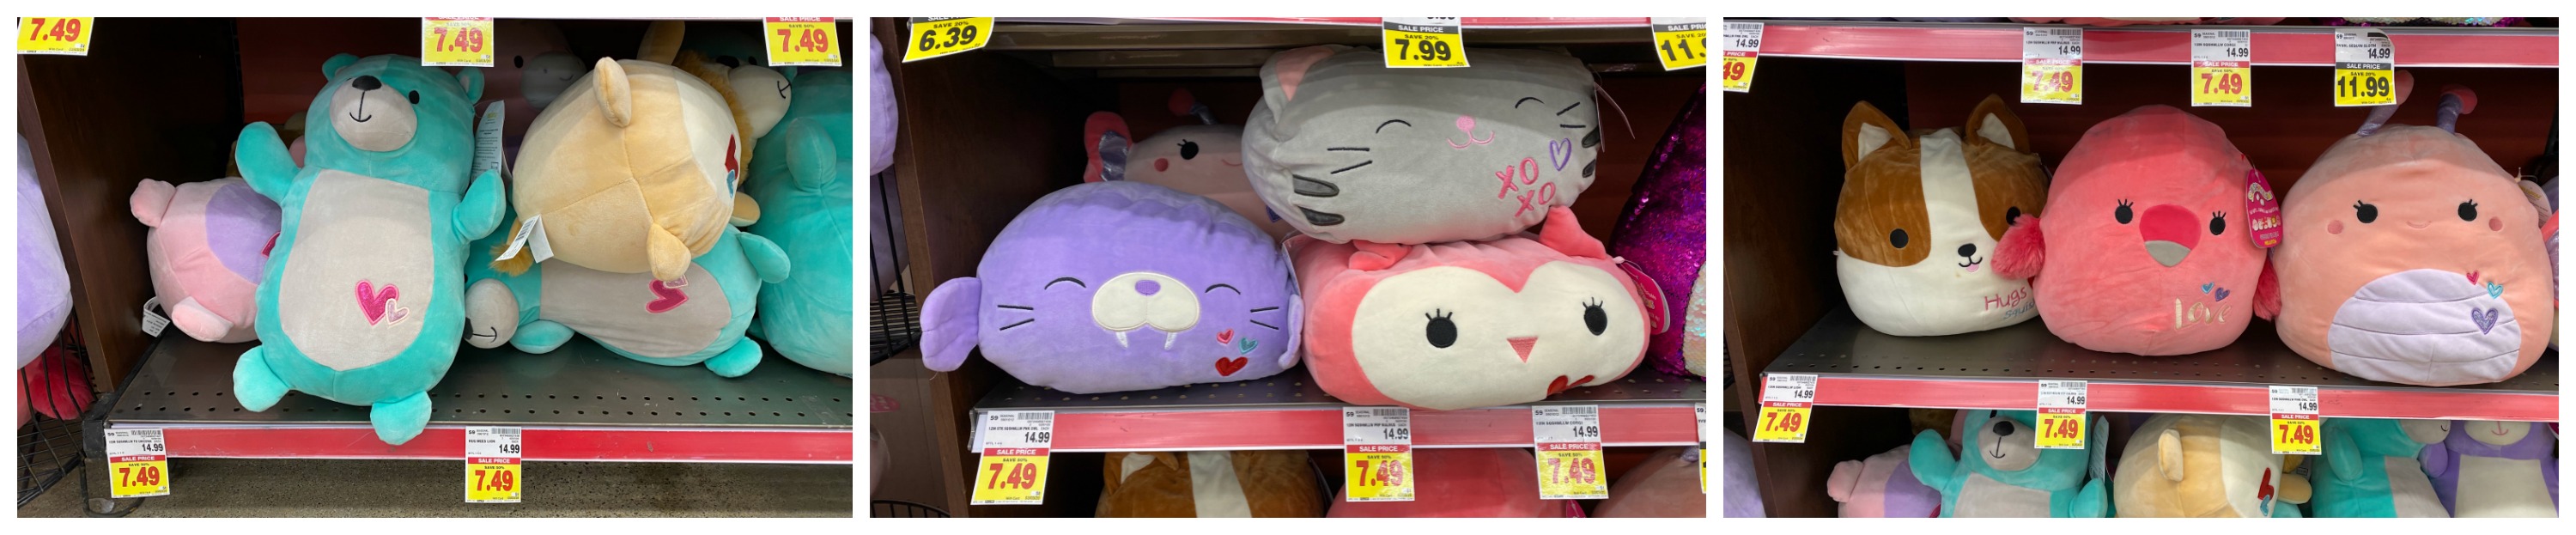 off of Plush Animals at Kroger JUST in 